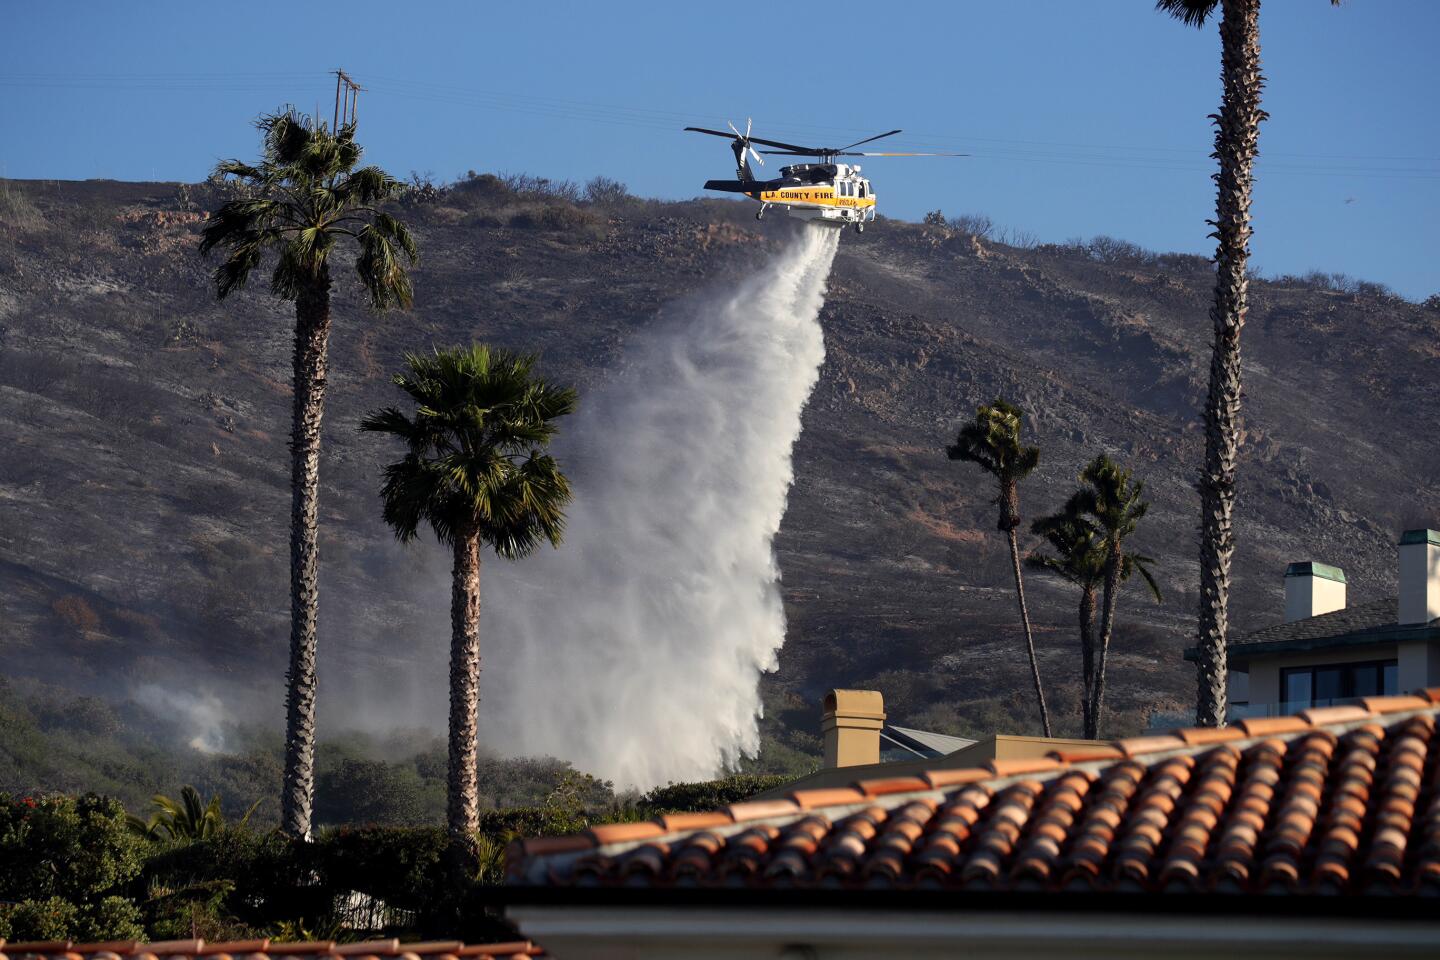 LAGUNA BEACH CA FEBRUARY 10, 2022 - A helicopter working the Emerald fire makes a water drop on the homes above Irvine Cove in Laguna Beach Thursday morning, February 10, 2022. (Irfan Khan / Los Angeles Times)